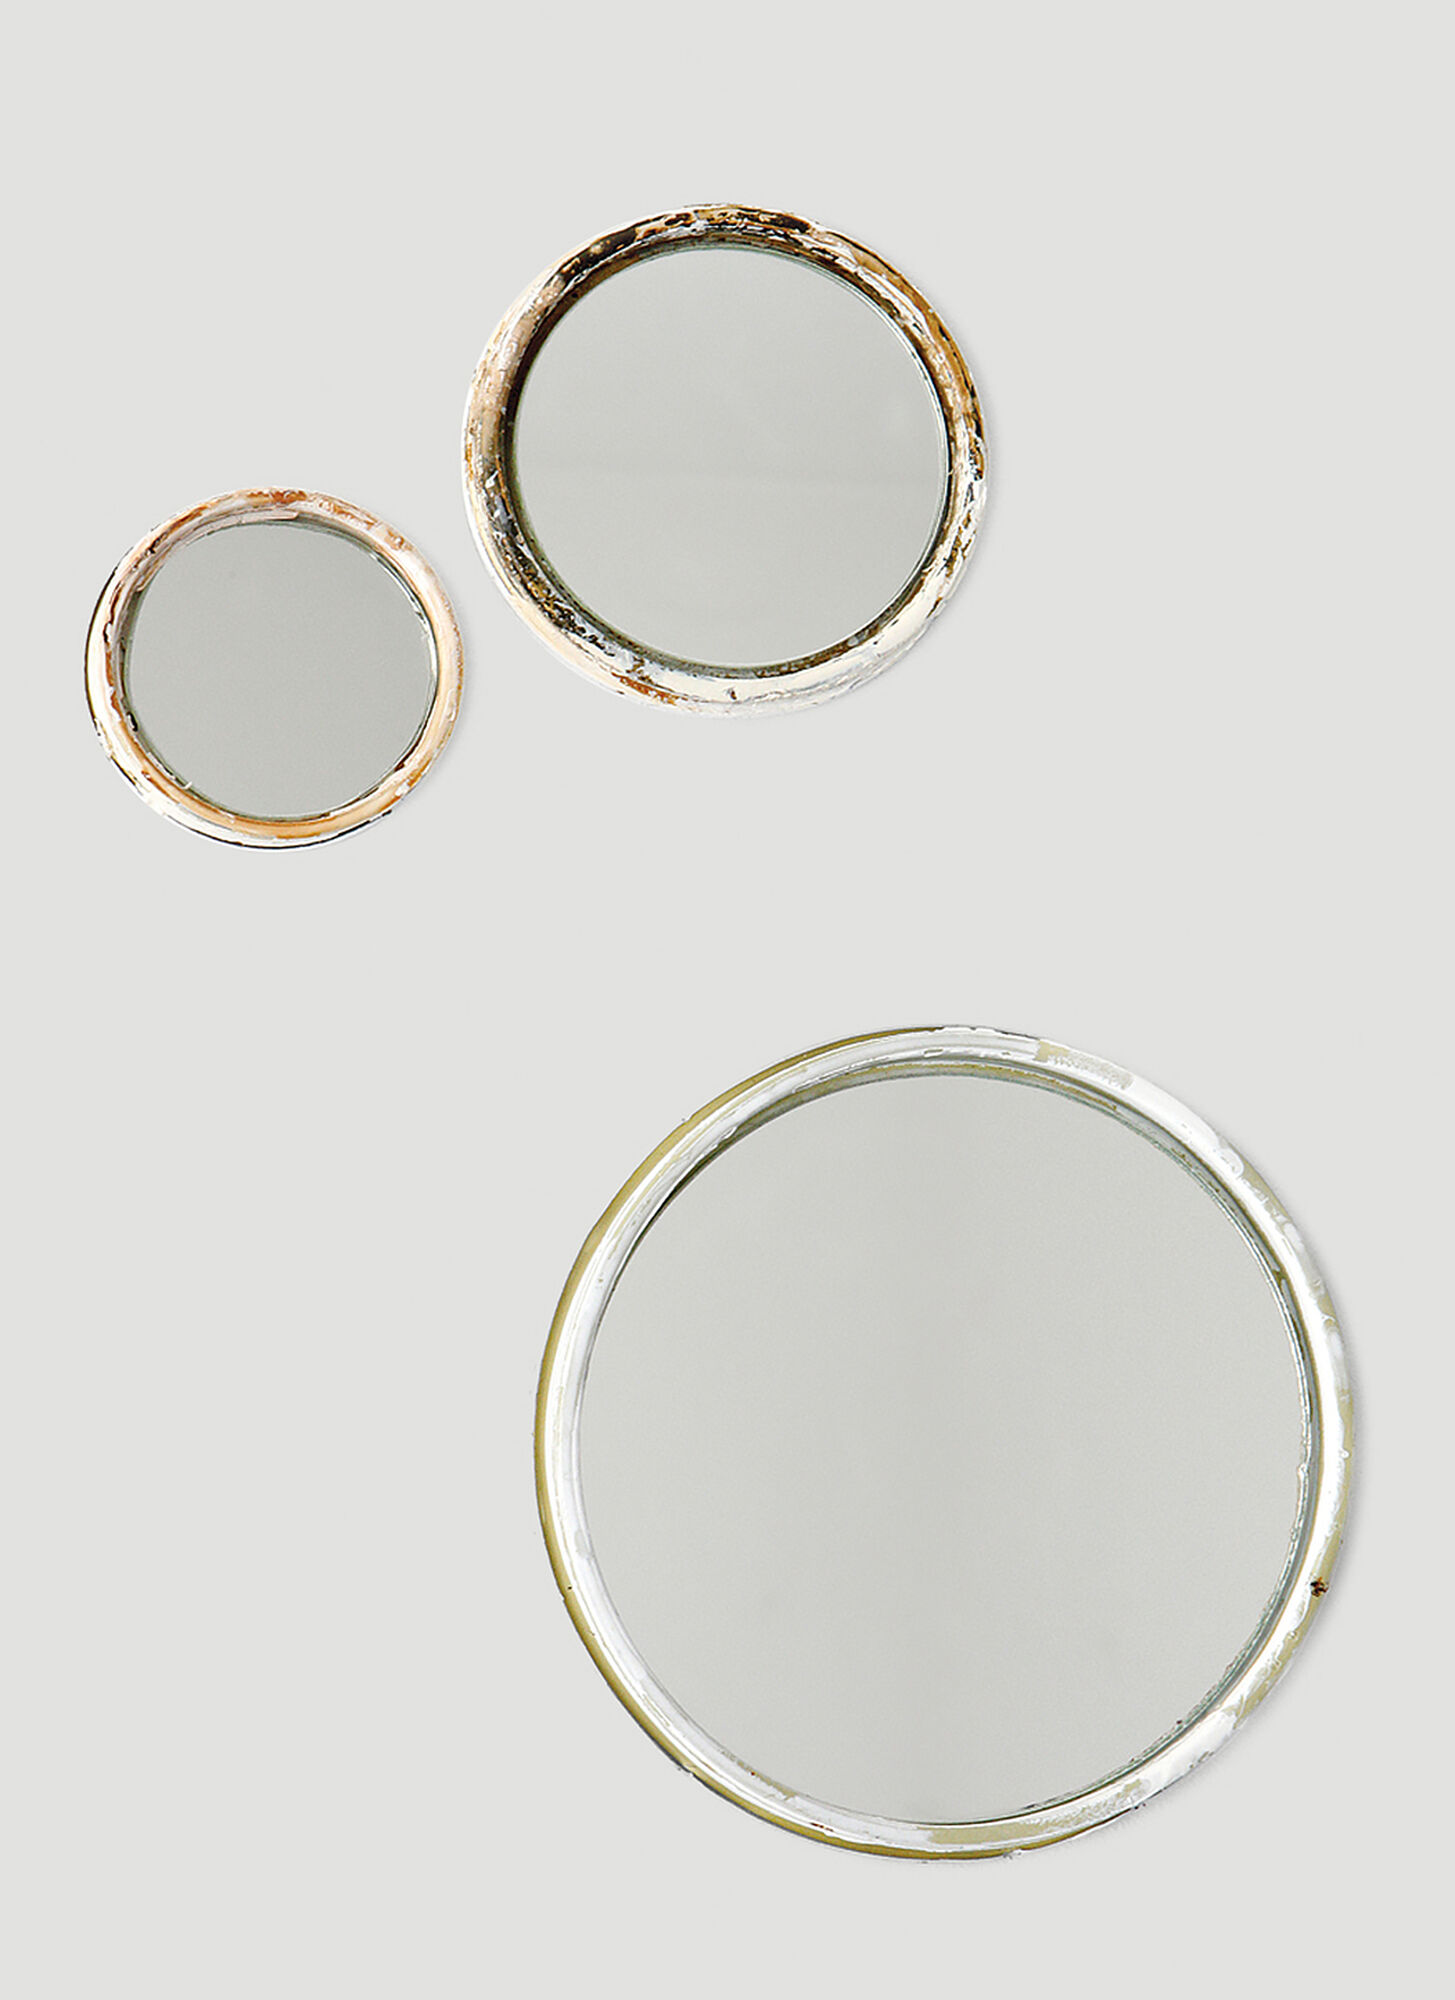 Valerie_objects Set Of Three Mirrors